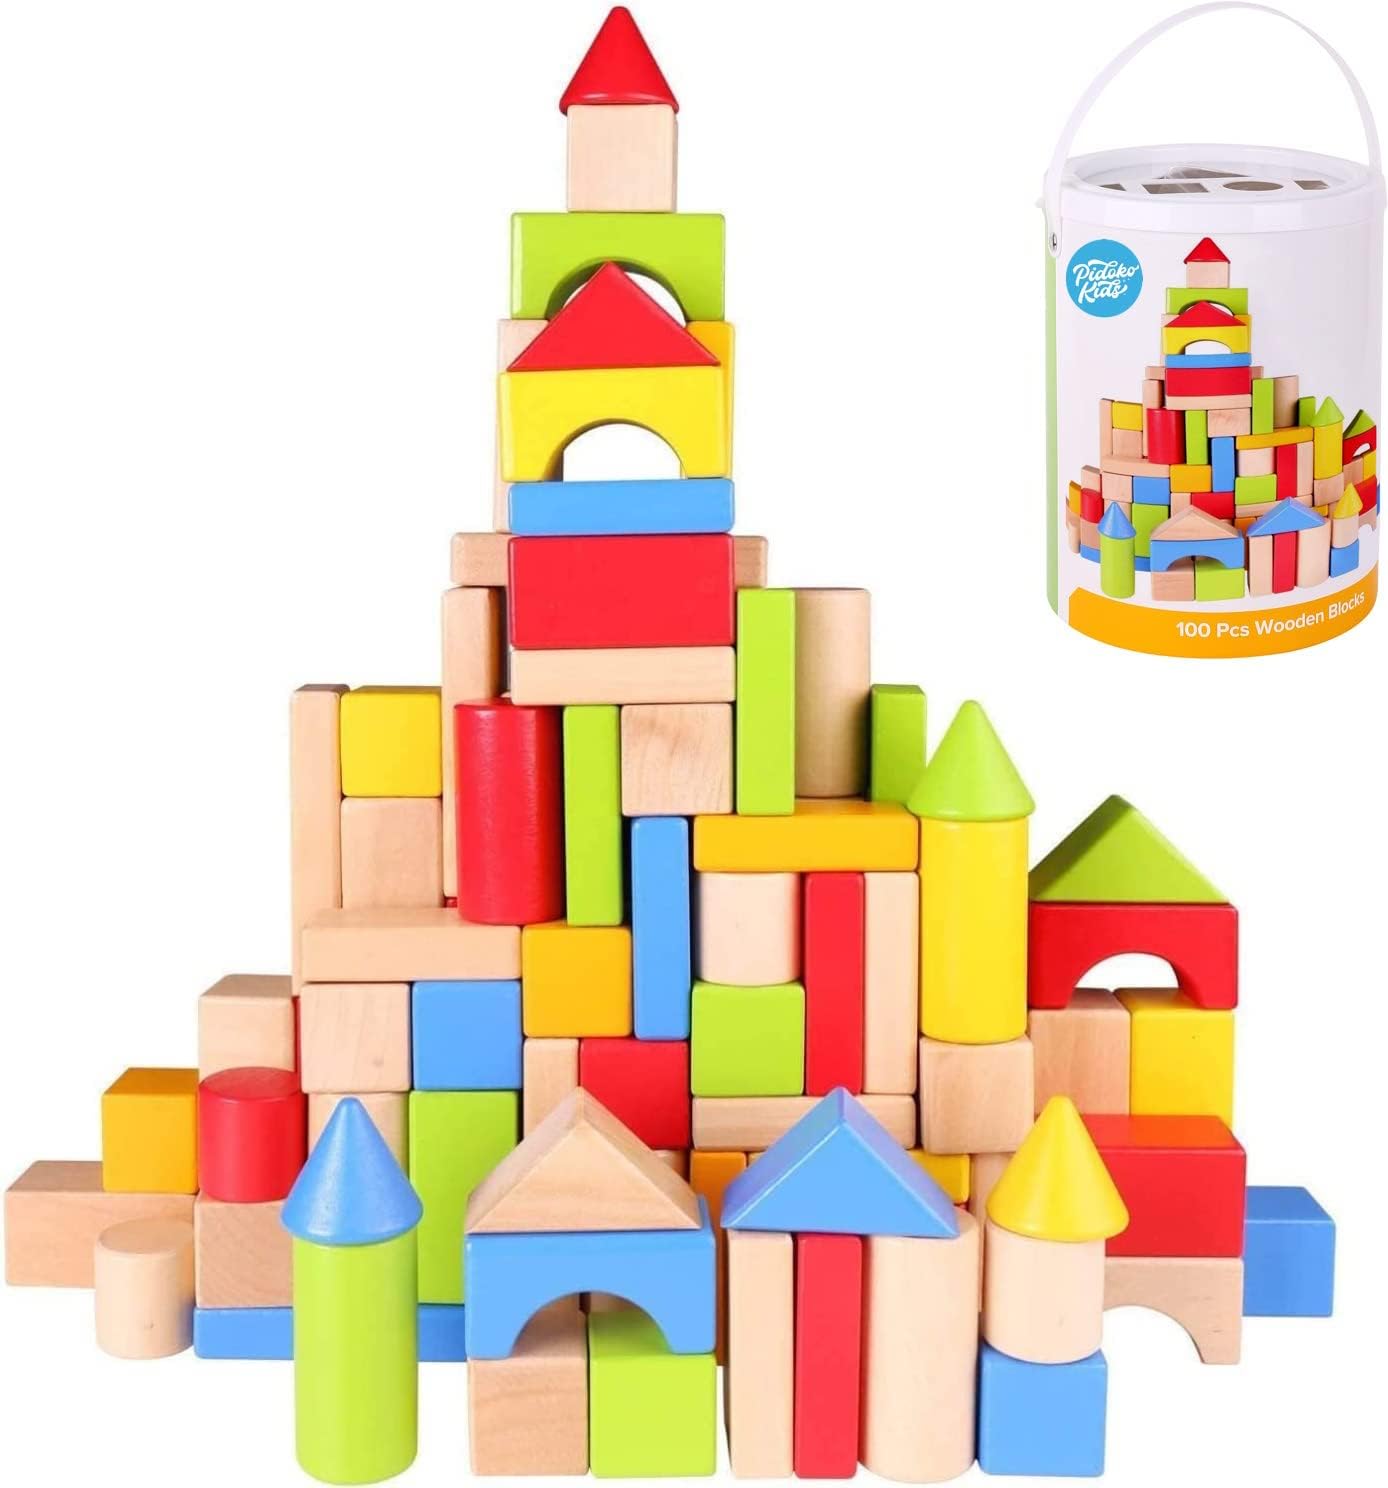 Pidoko Kids Baby Shark Wooden Blocks - 100 Pcs - Includes Storage Container